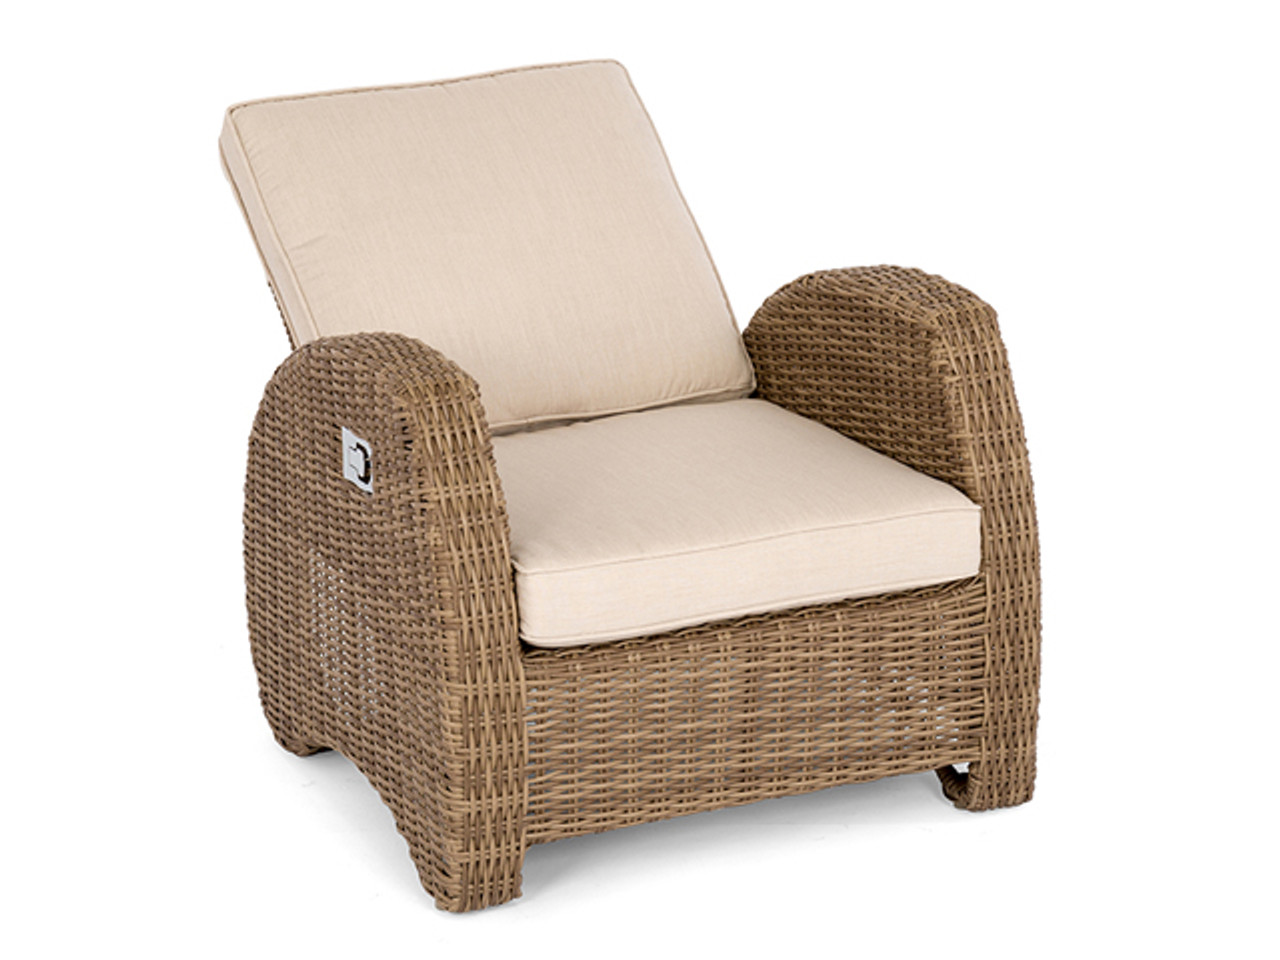 Bora Bora Driftwood Outdoor Wicker and Canvas Flax Cushion 5 Pc. Reclining Chair Group with 20 in. Side Table